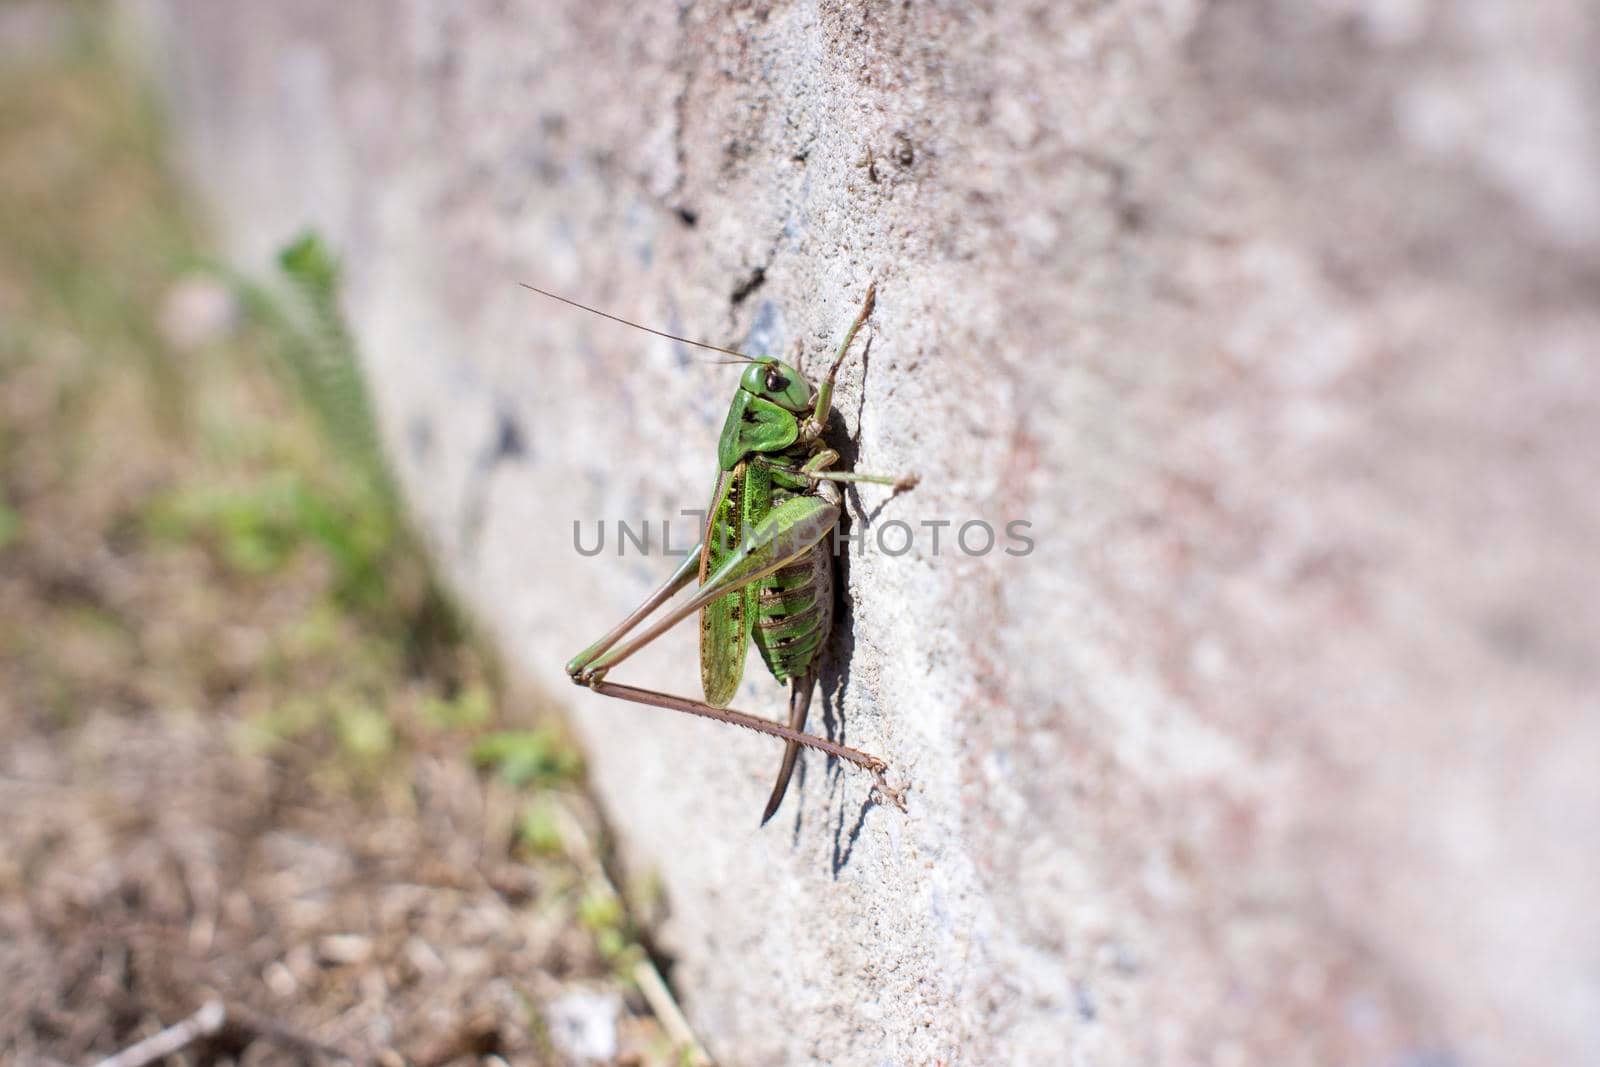 Grasshopper on a white wall blur bacground with copy space